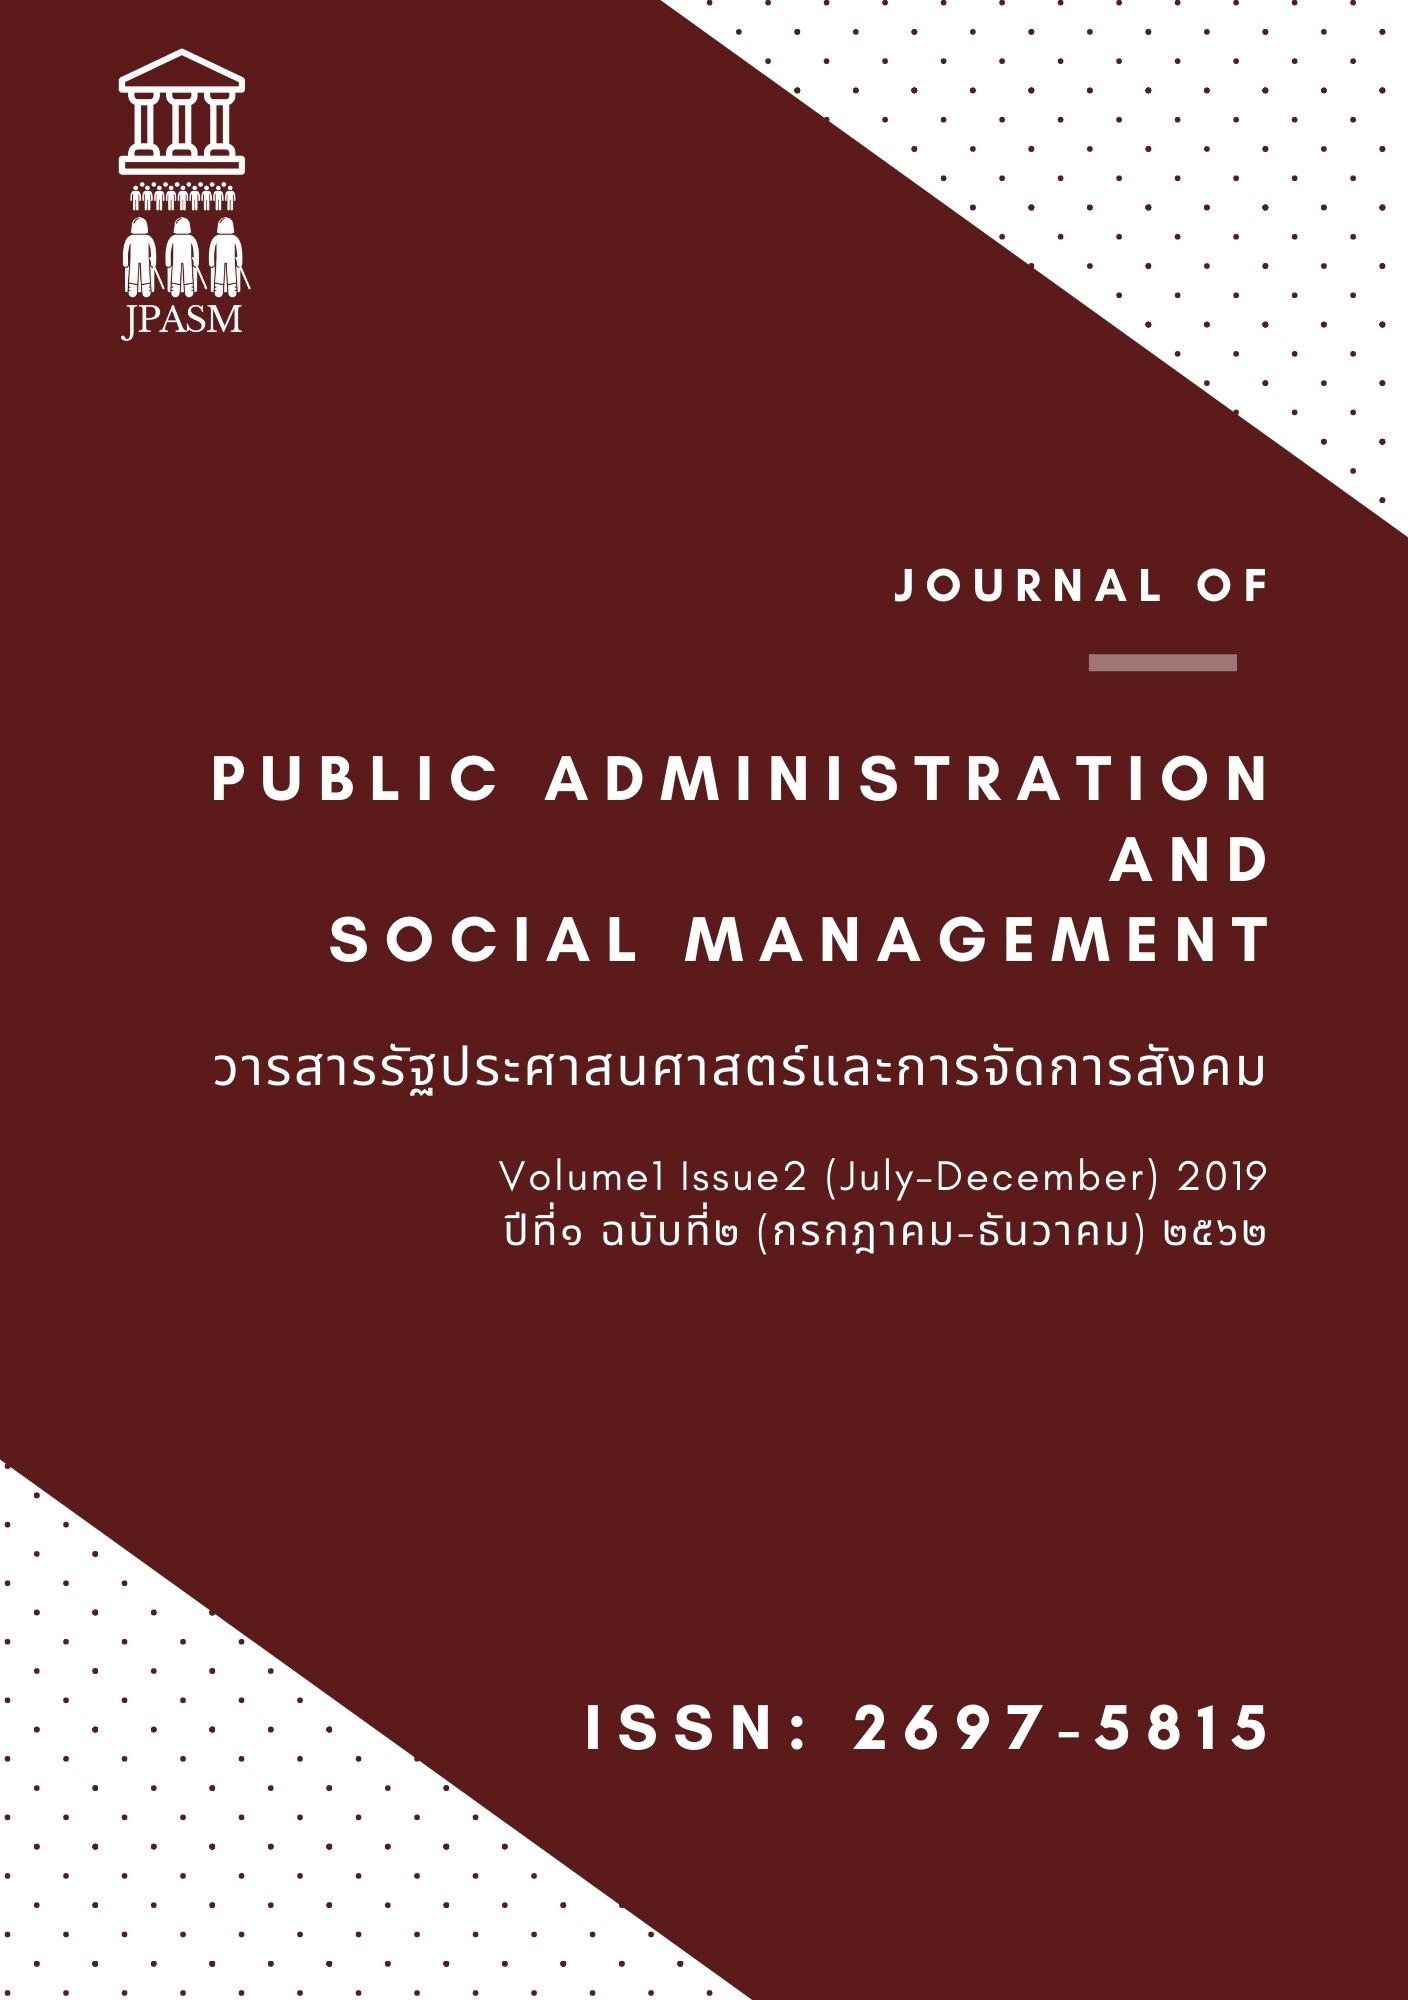 					View Vol. 1 No. 2 (2019): Journal of Public Administration and Social Management
				